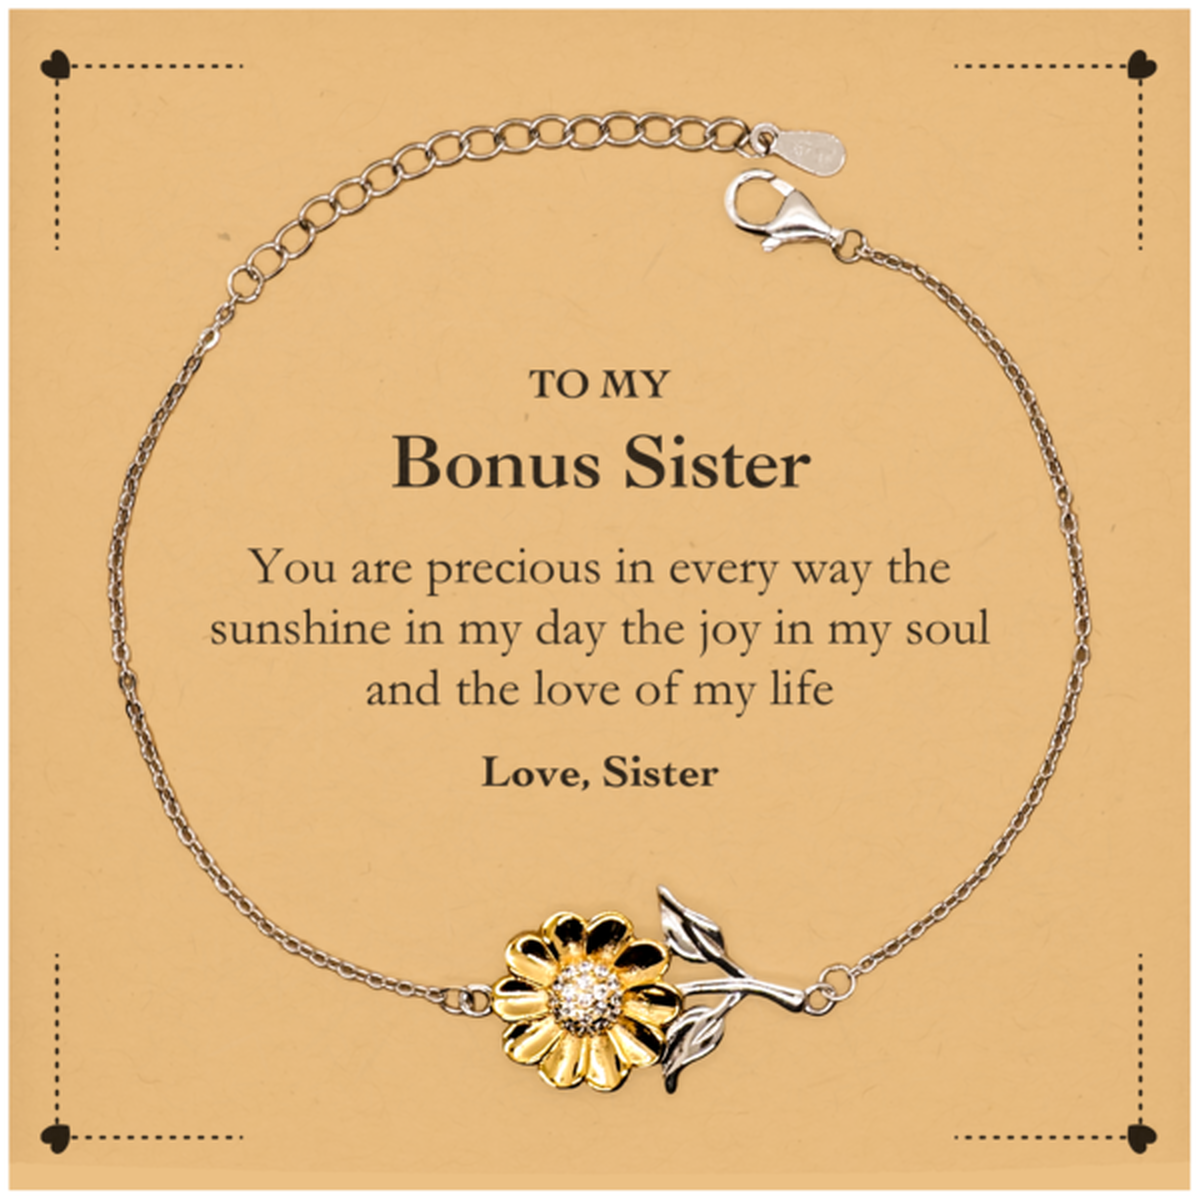 Graduation Gifts for Bonus Sister Sunflower Bracelet Present from Sister, Christmas Bonus Sister Birthday Gifts Bonus Sister You are precious in every way the sunshine in my day. Love, Sister